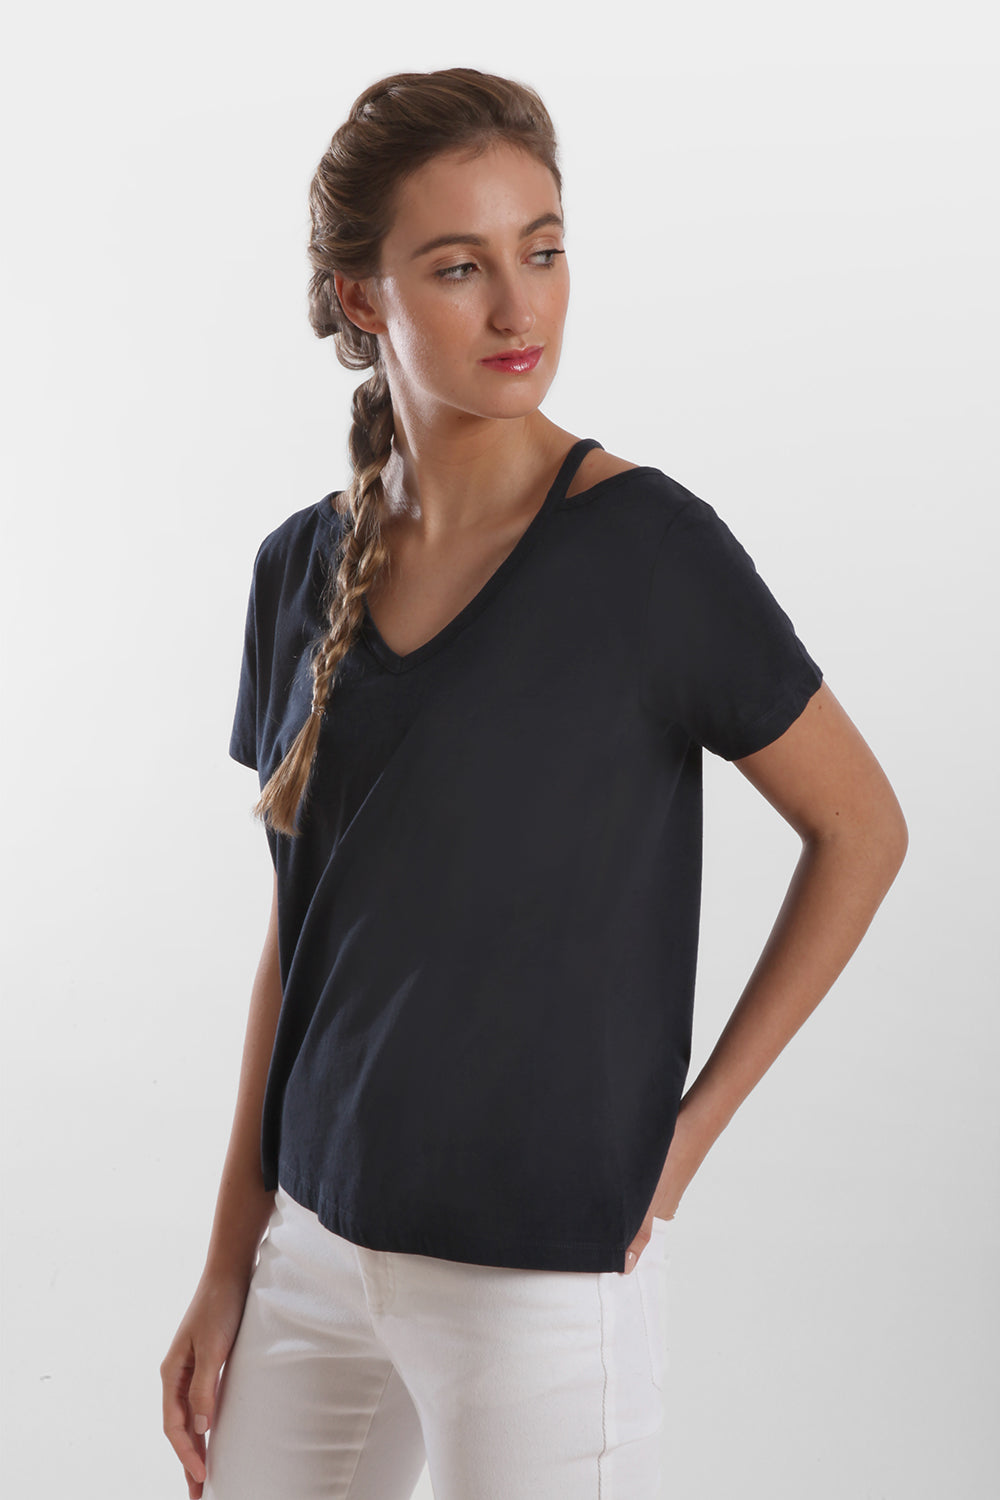 Cut Out V Neck Tee: FINAL SALE